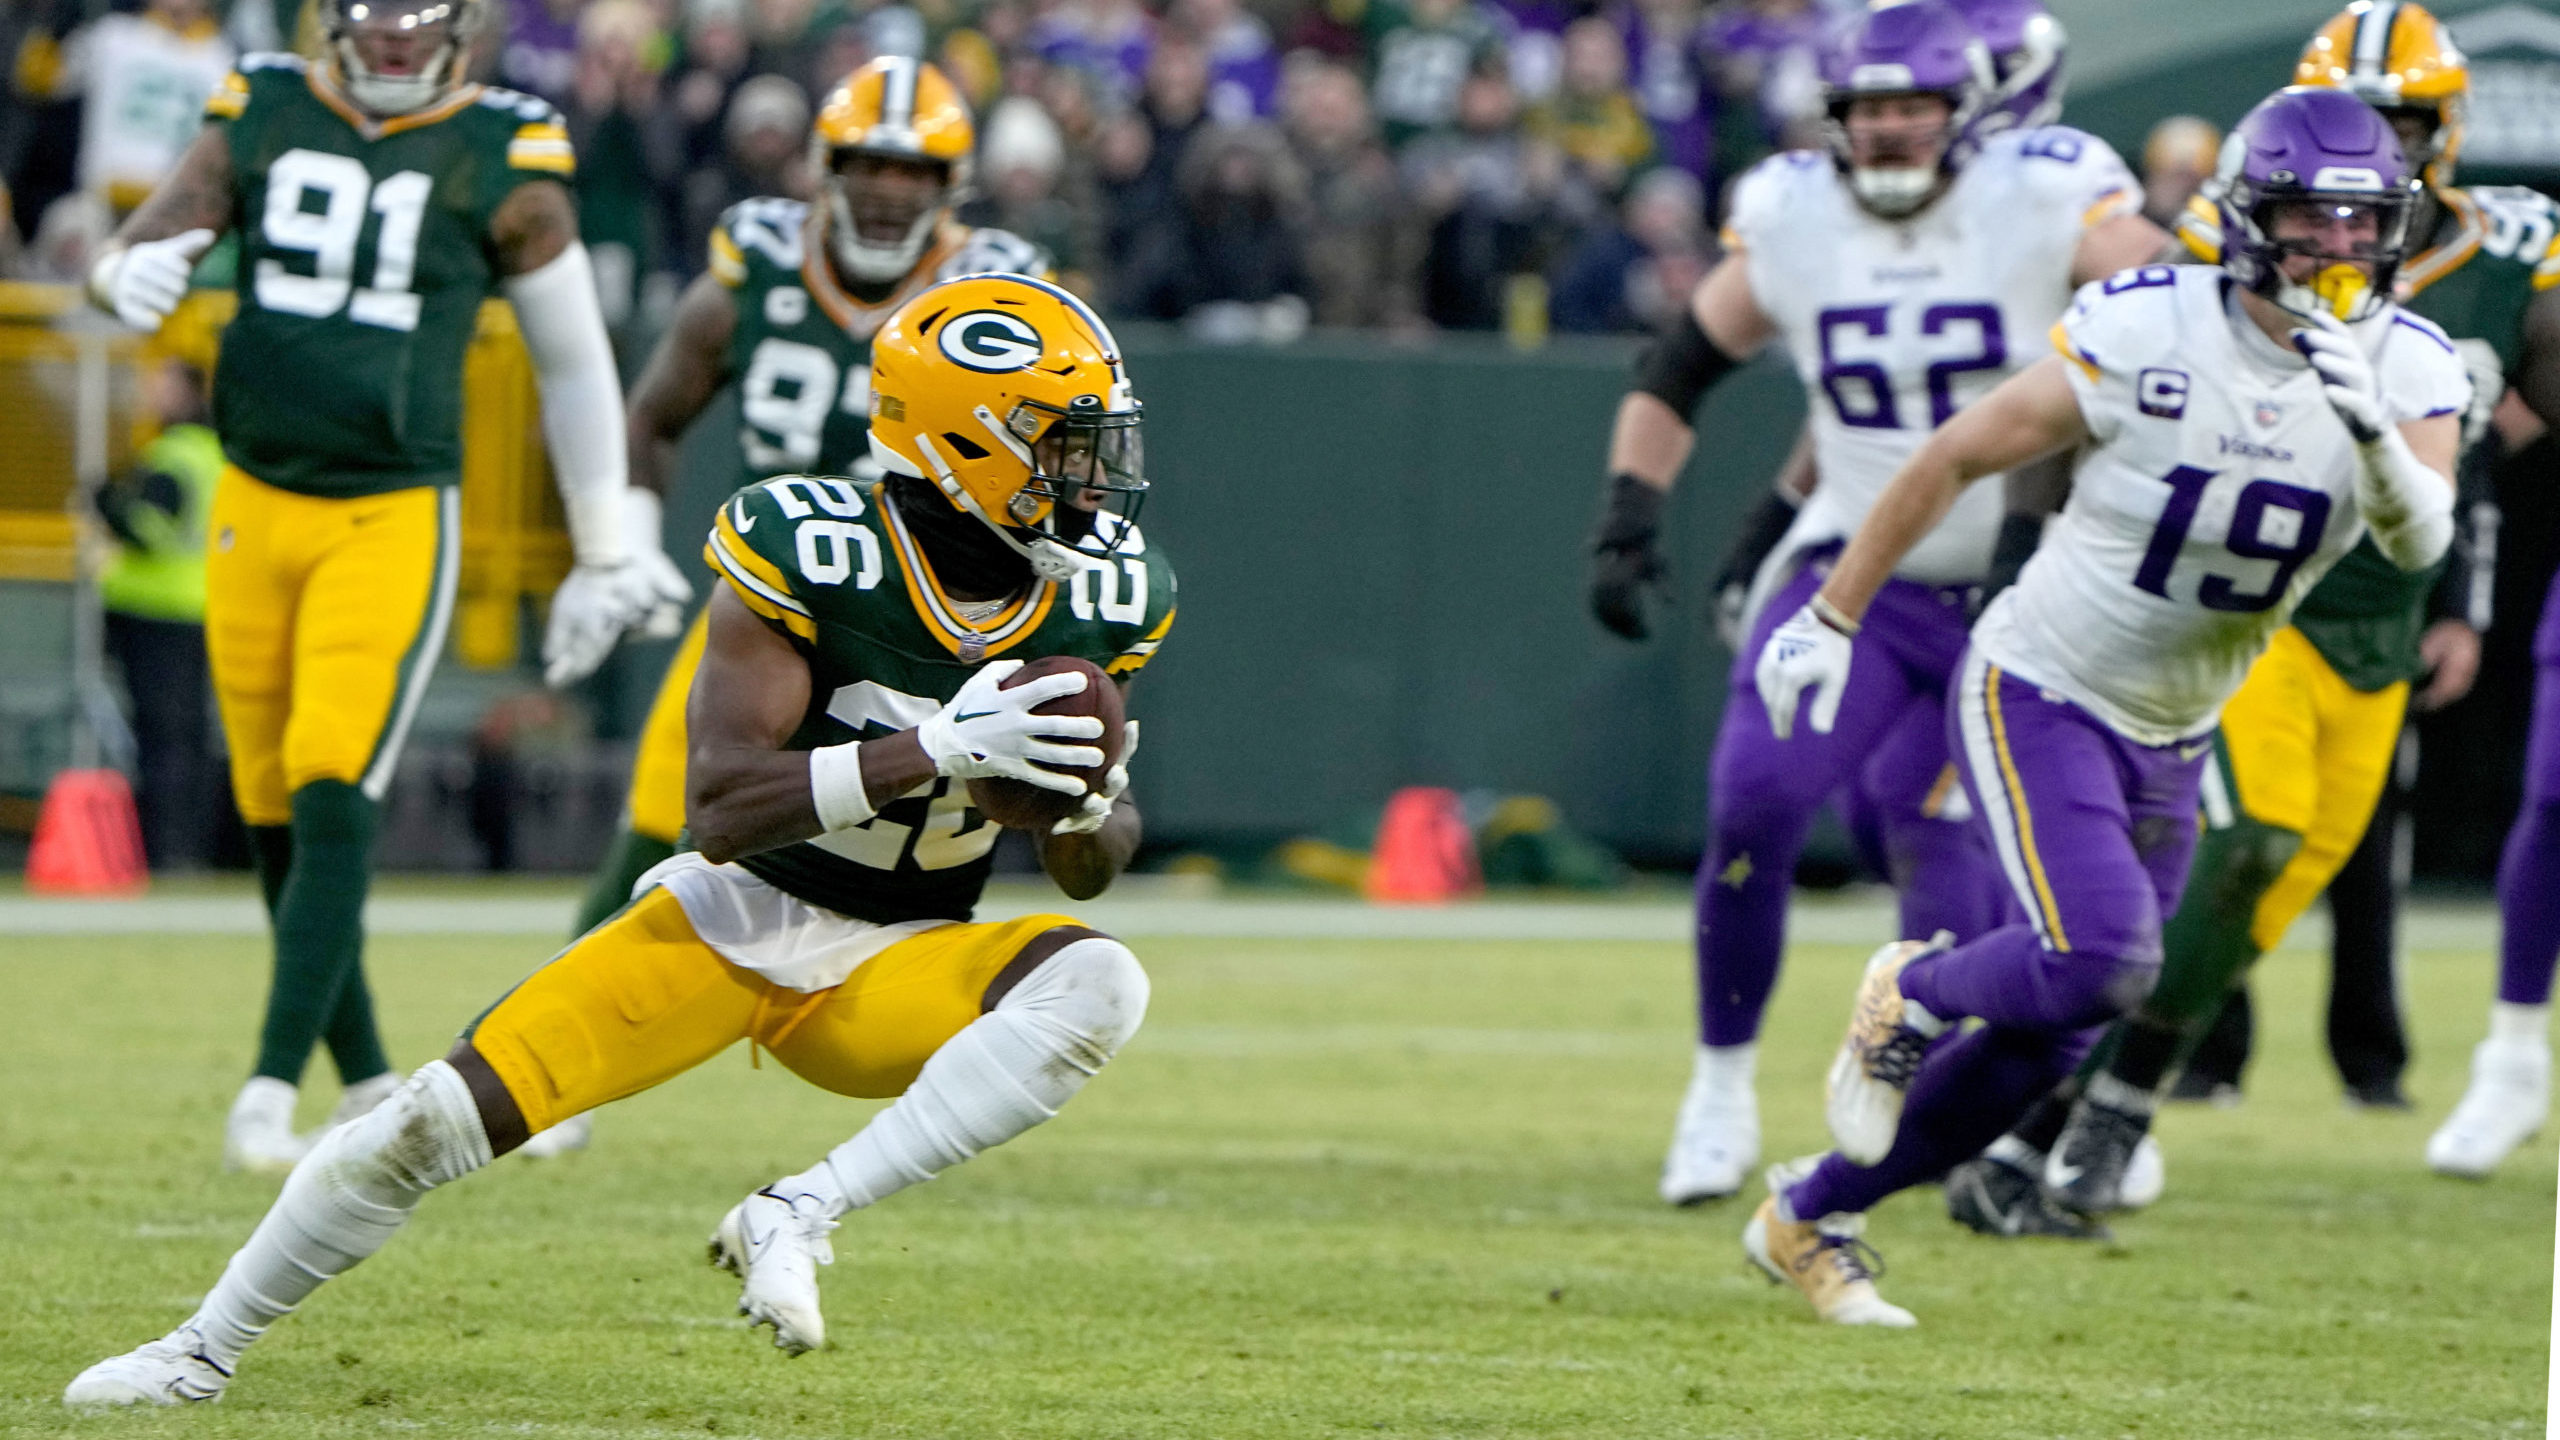 Vikings Made Too Many Self-Inflicted Mistakes vs. Packers